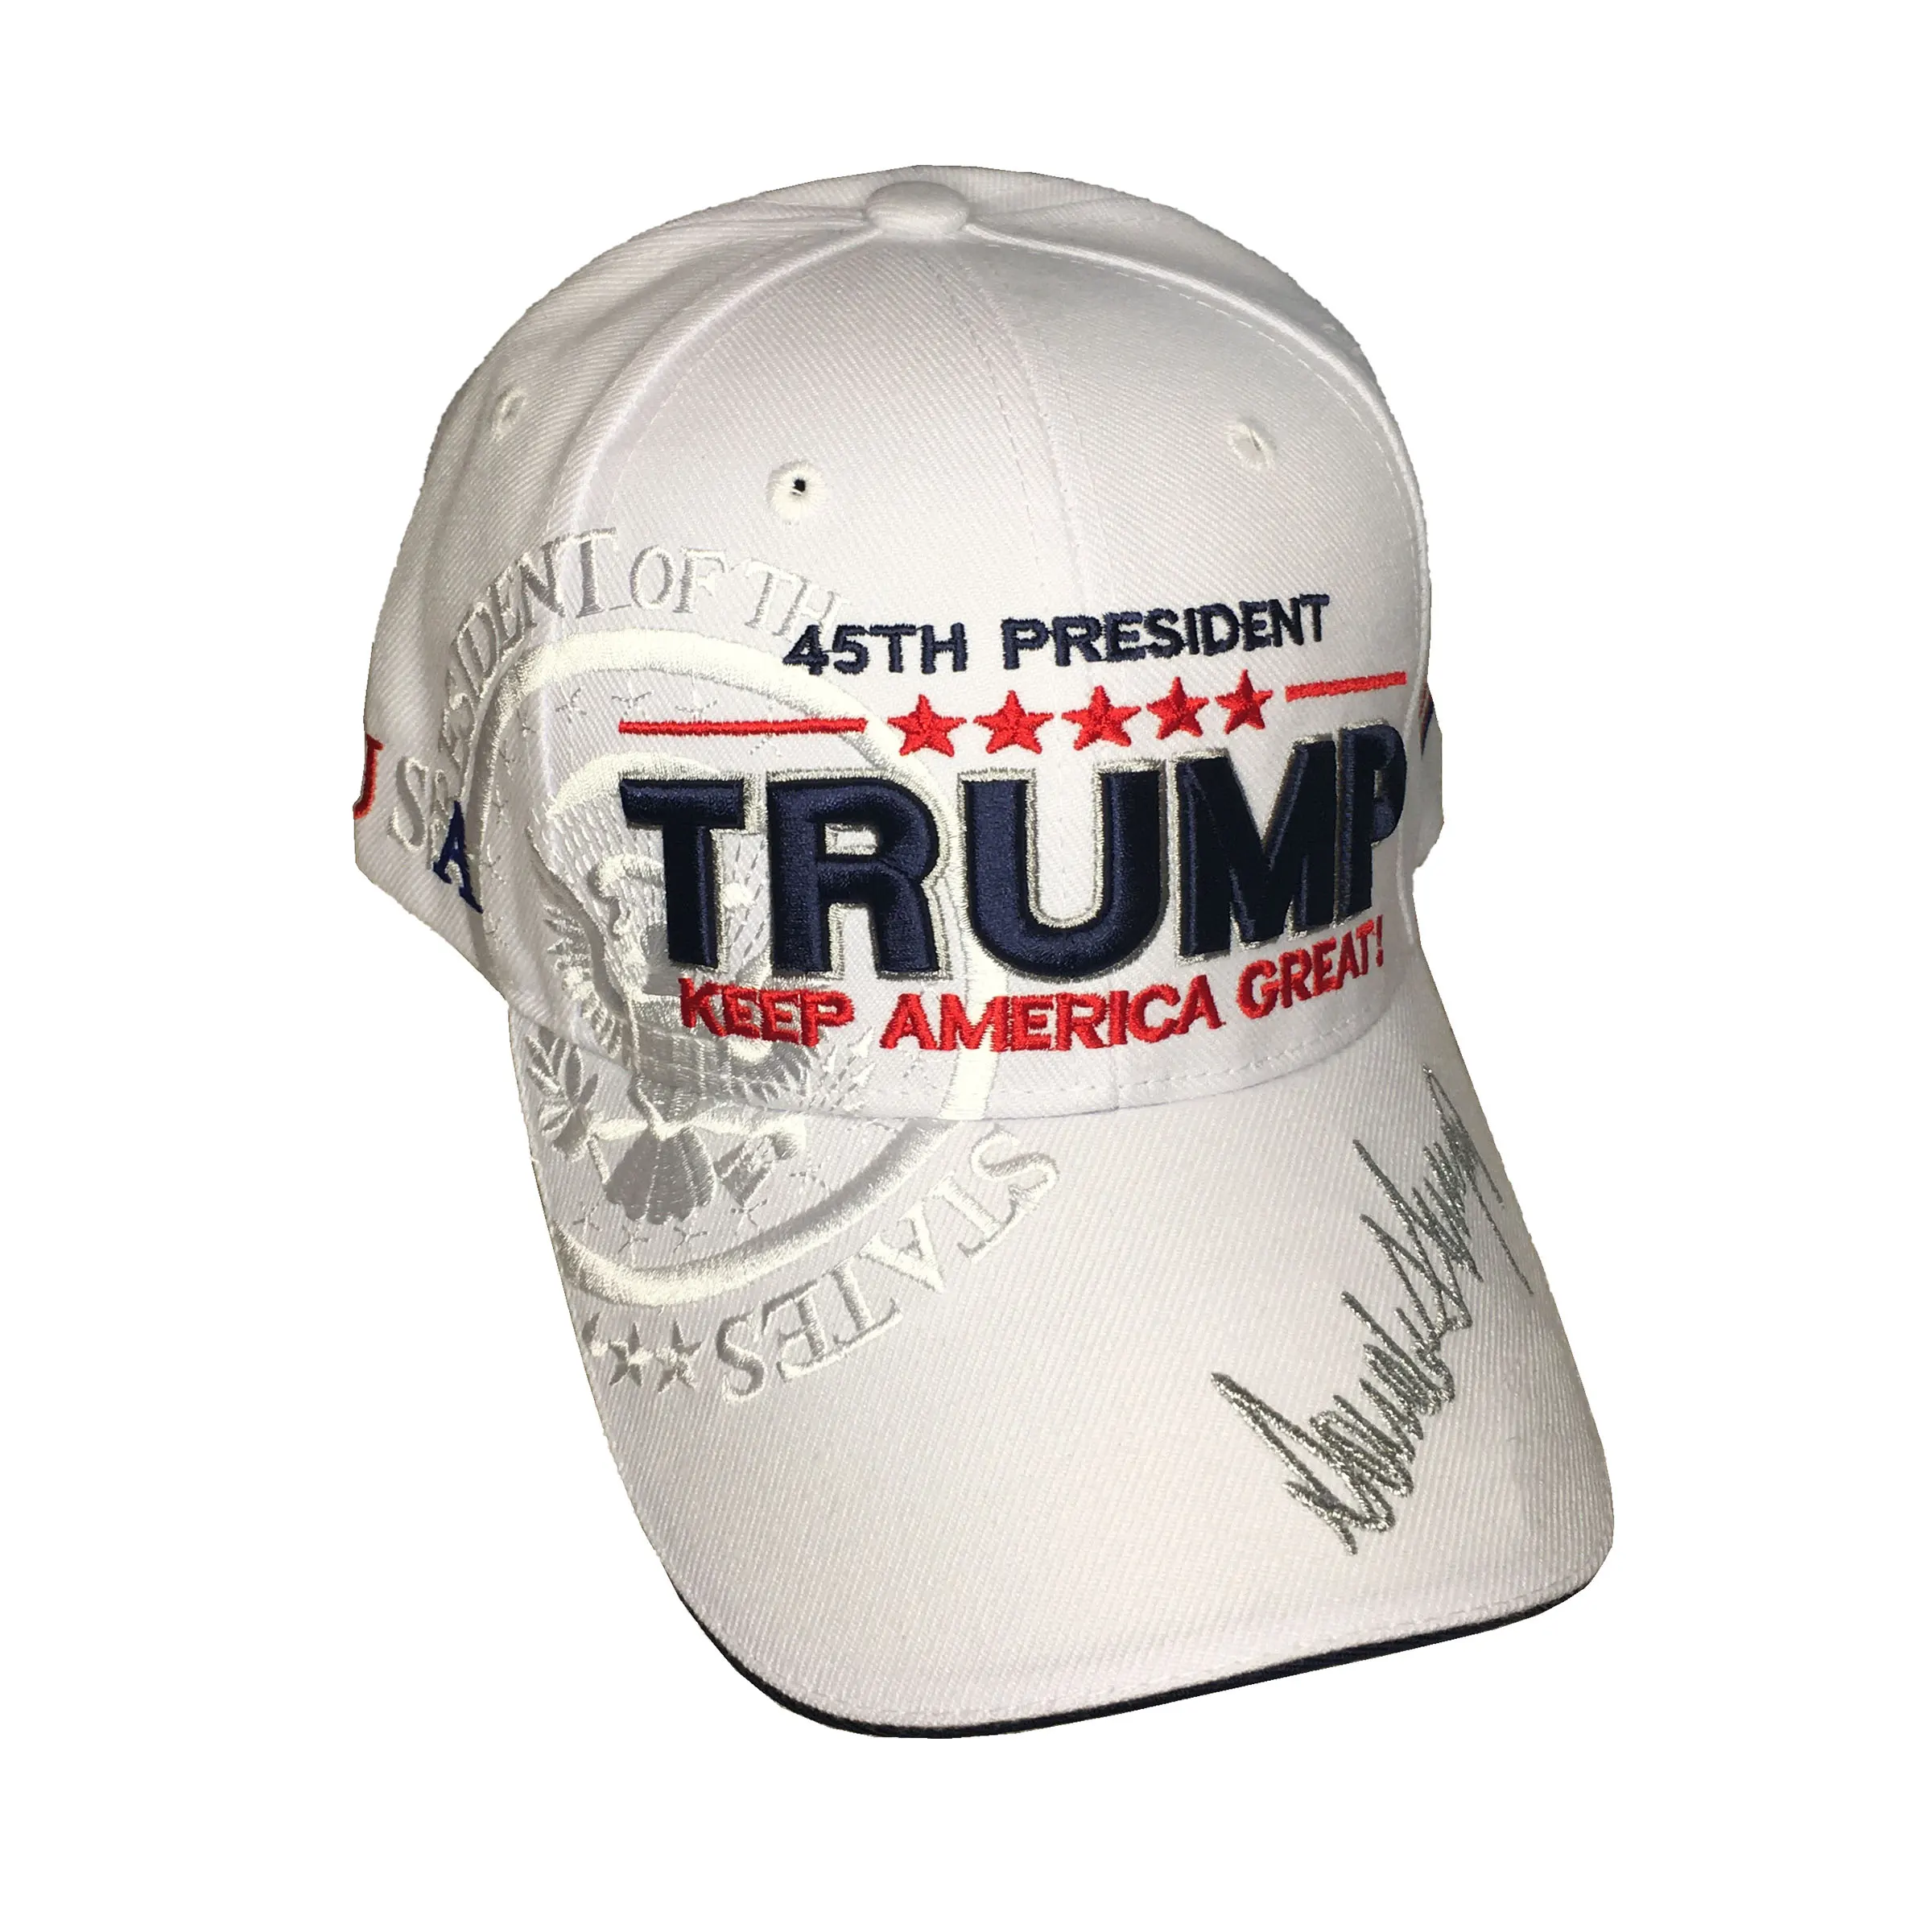 Donald Trump 2020 Hat Keep Make America Great Again Embroidered Cap Black KAG BE 